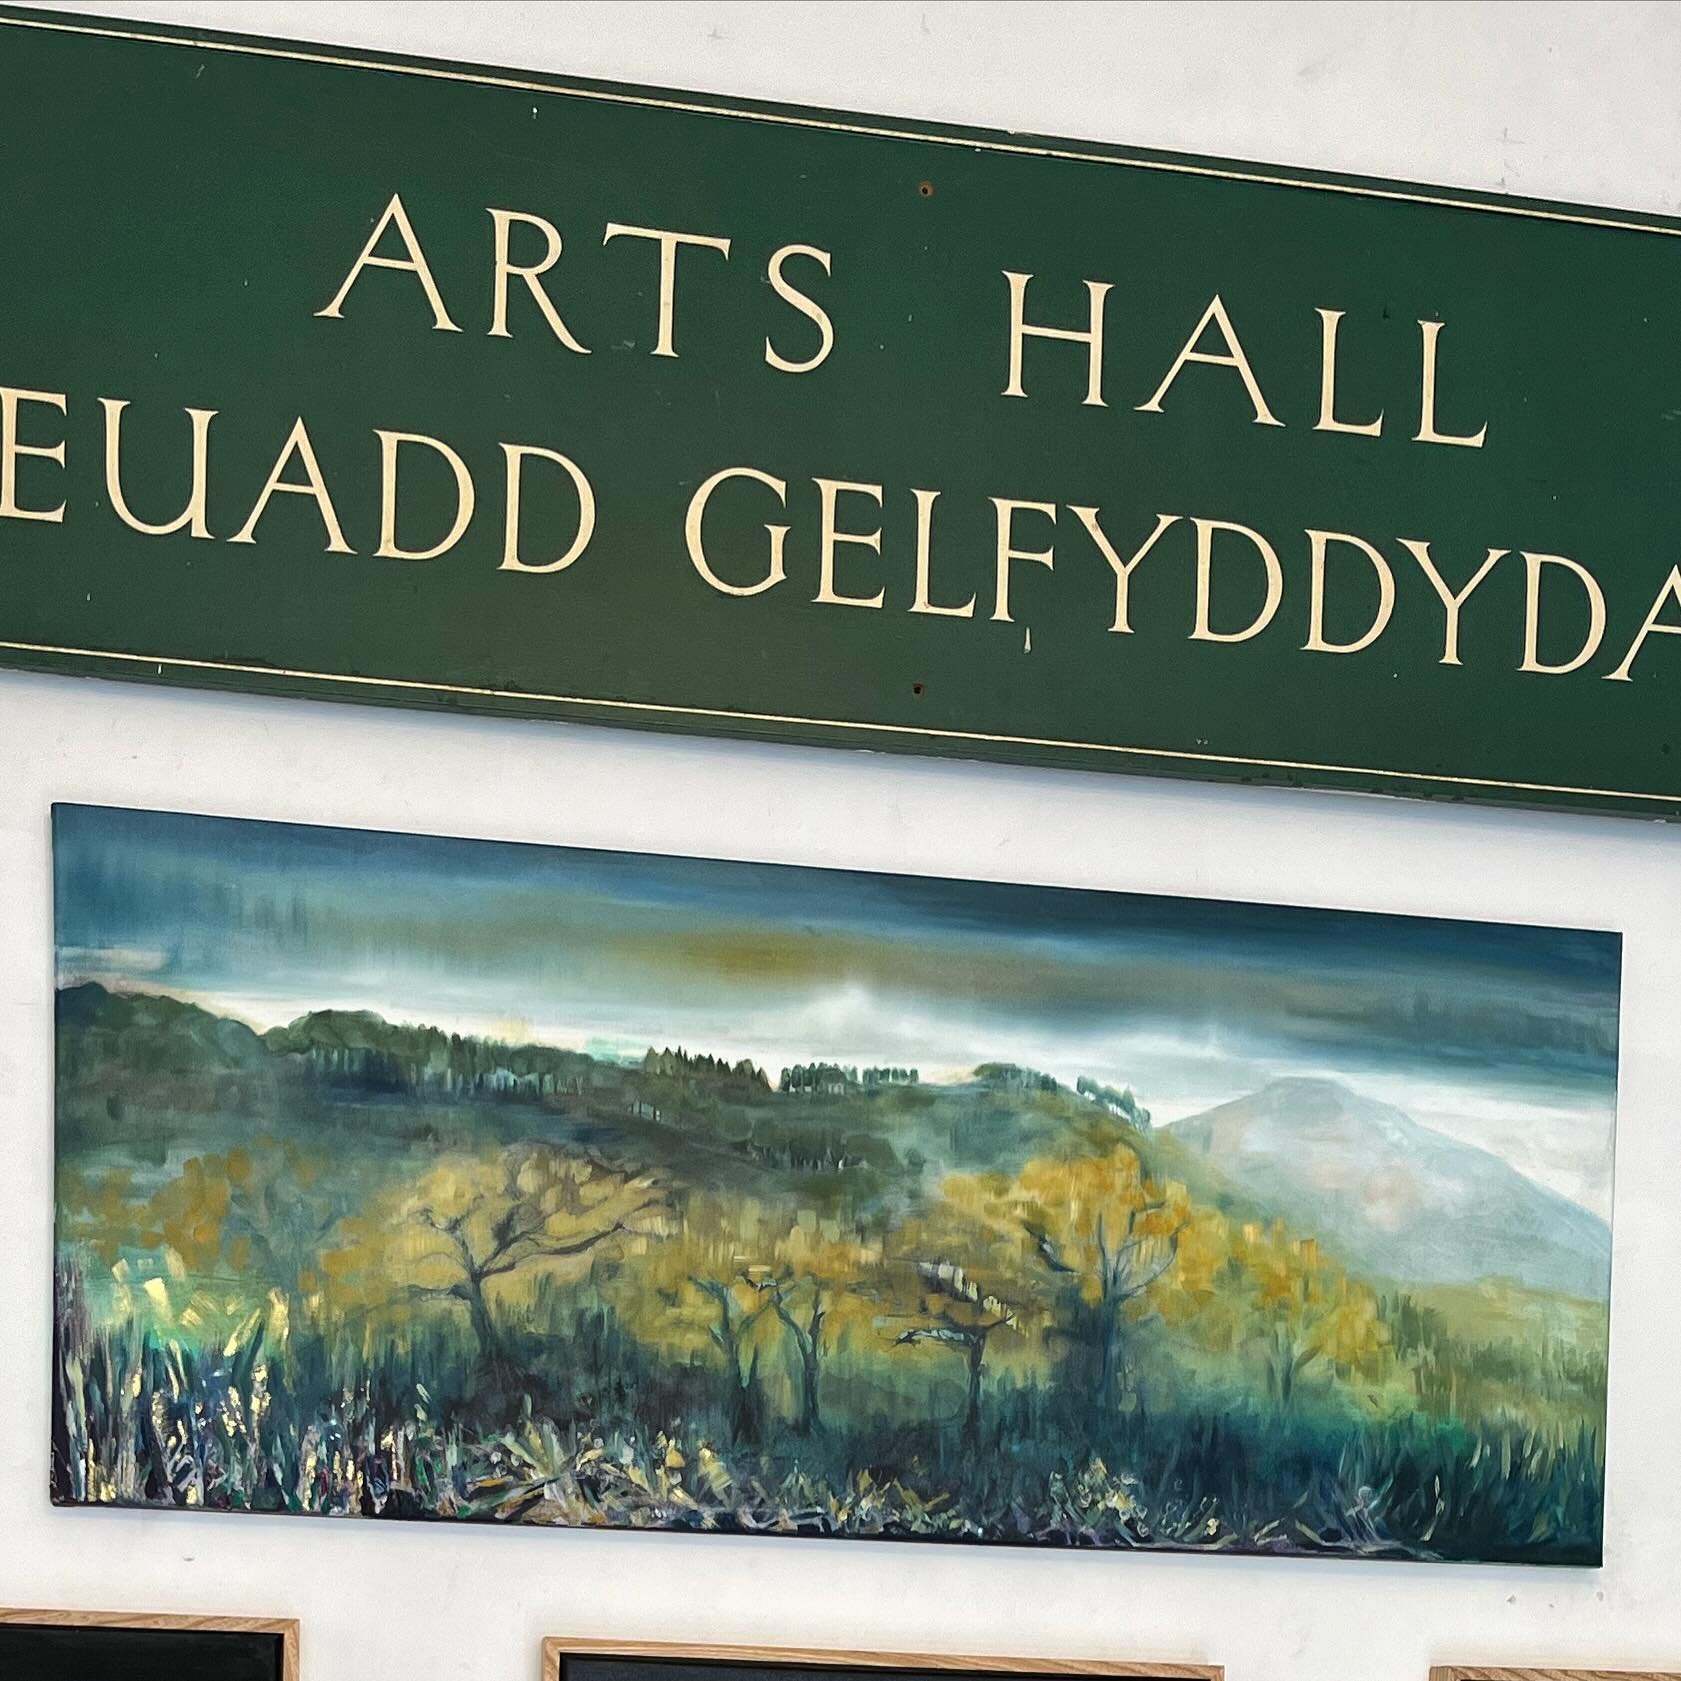 My new work with a view of Pen-Y-Fan has been hung in the old electric shop today in hay. These Paintings are painted in location in and around hay on wye and the beacons. Painting scenes from this area is an absolute luxury! In all their natural lig